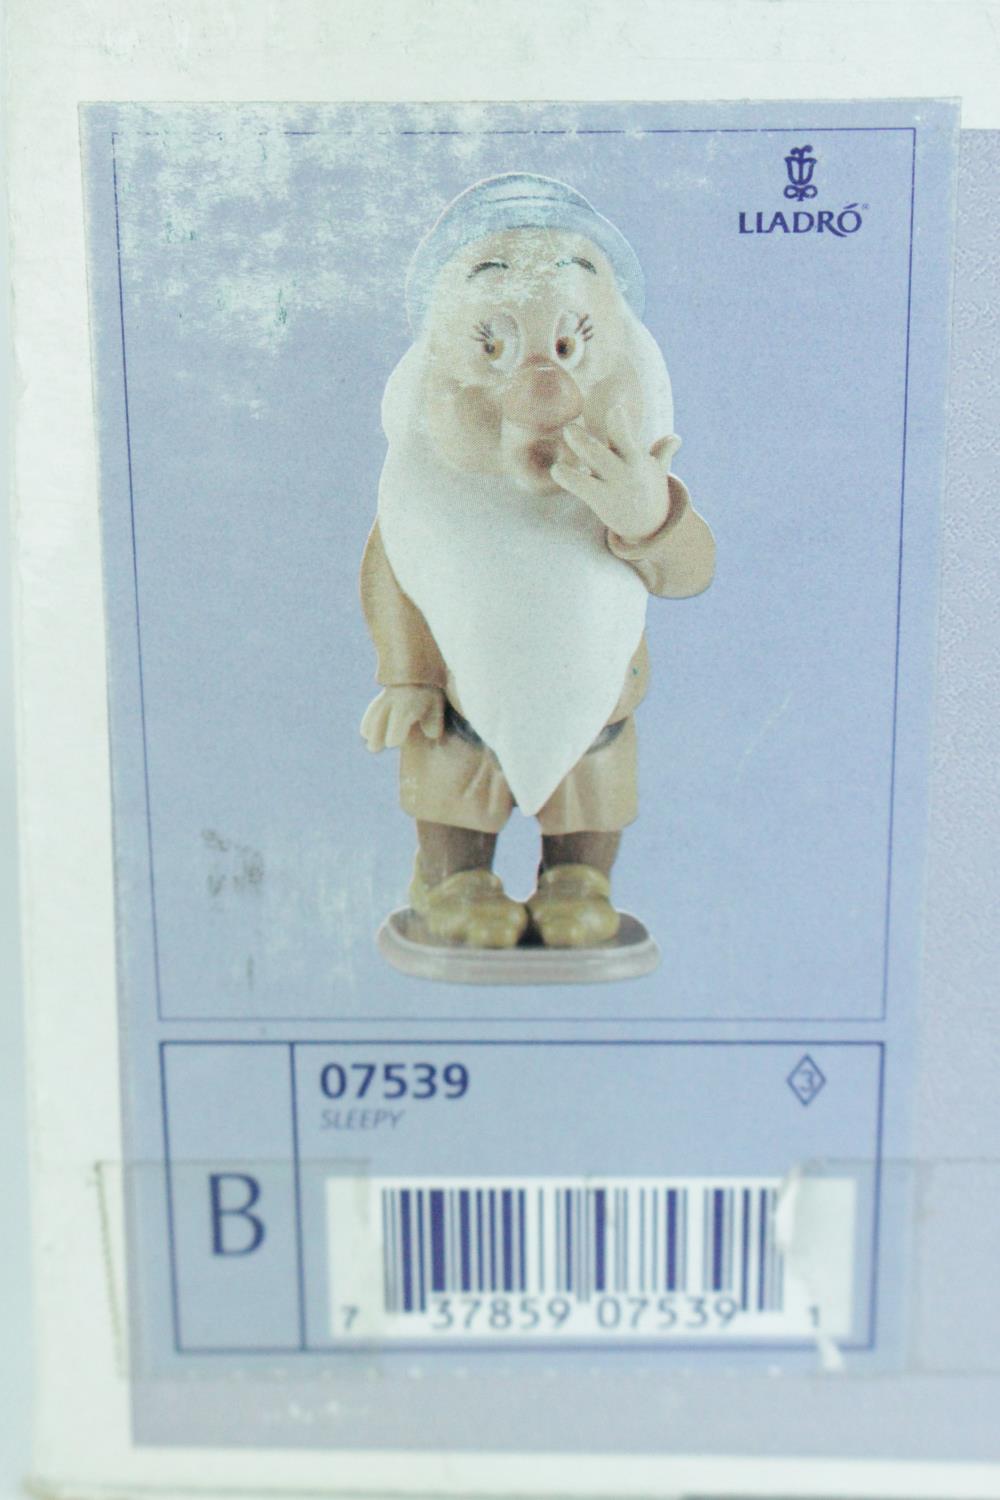 Lladro 'Sleepy', From The Disney Snow White and the Seven Dwarfs collection , Sculptor: Francisco - Image 4 of 5